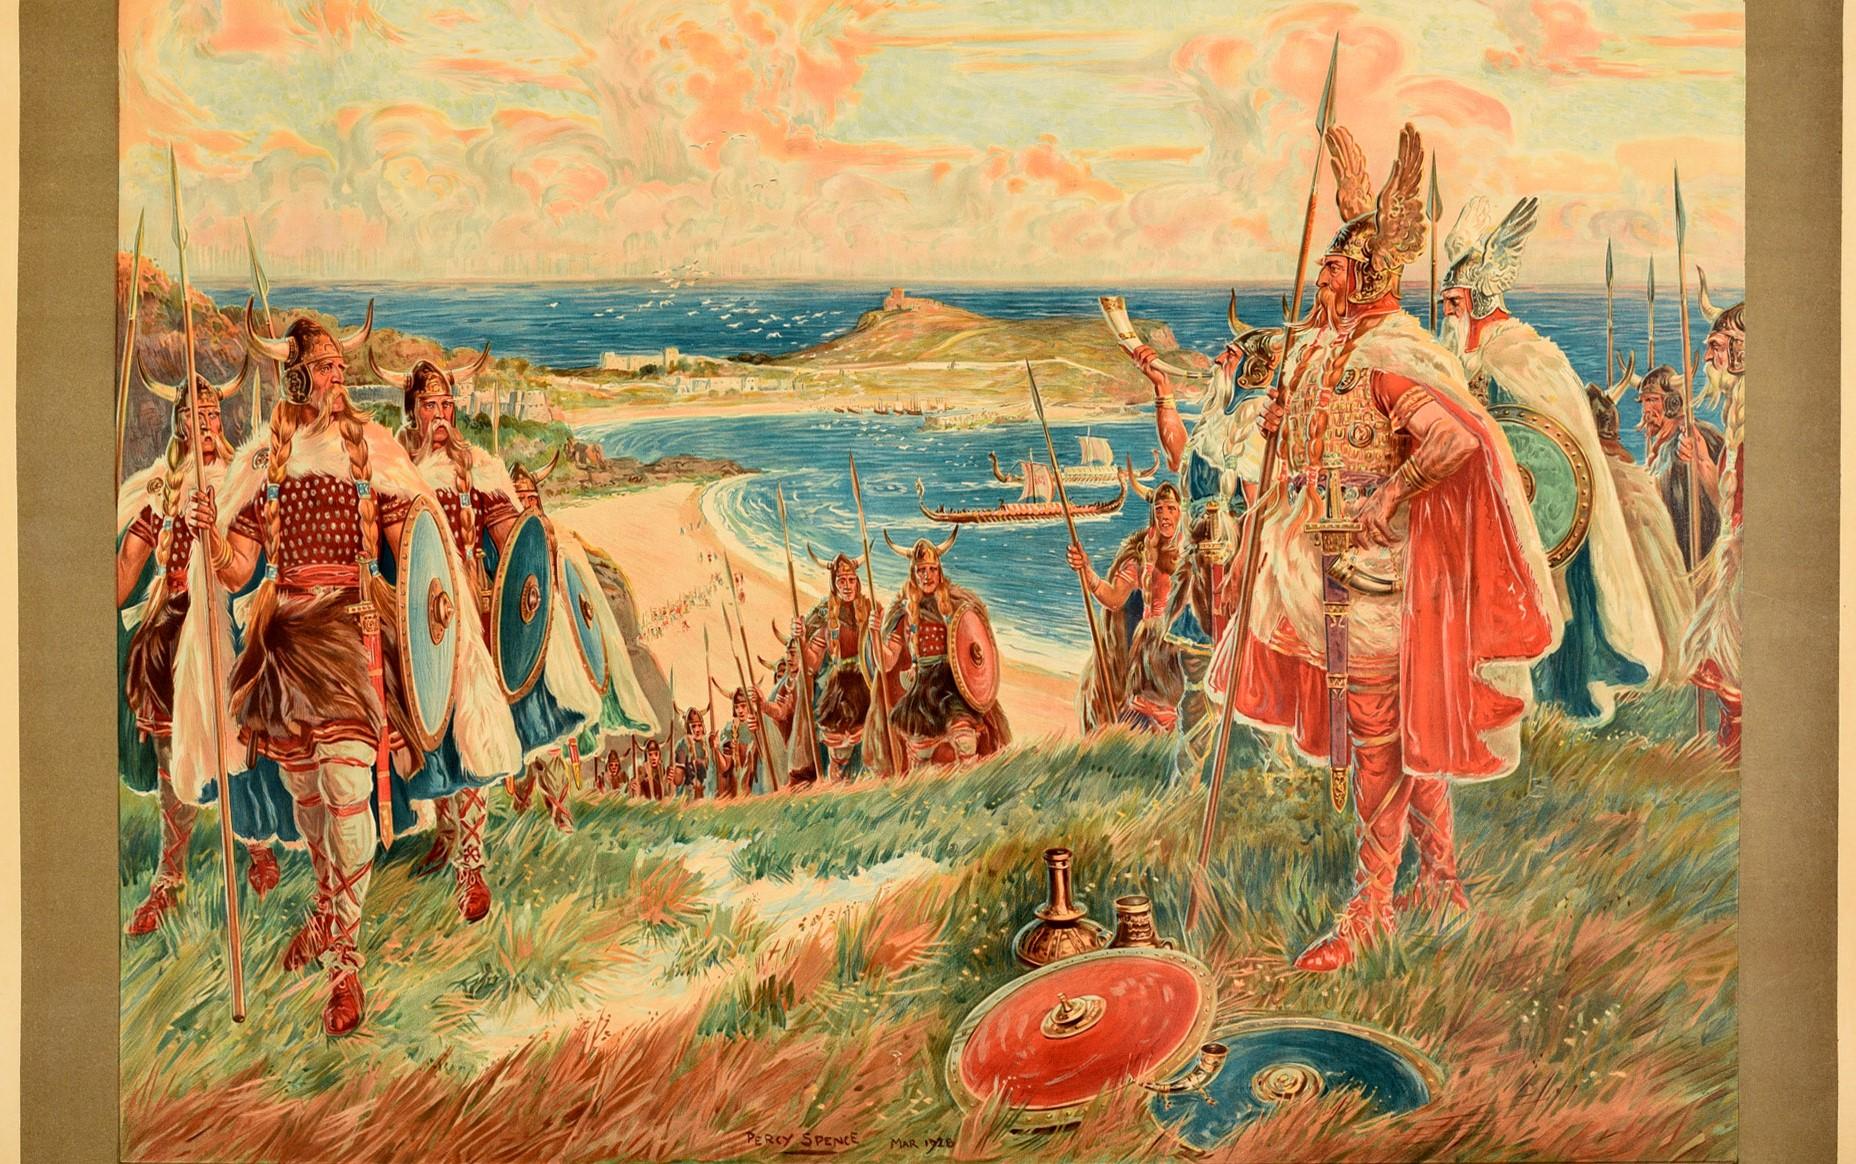 Original vintage Great Western Railway travel poster for the Cornish Riviera The Vikings landing on St Ives Beach featuring an historical scene by Percy Spence (1868-1933) depicting Vikings in battle uniform with capes and horned helmets marching up